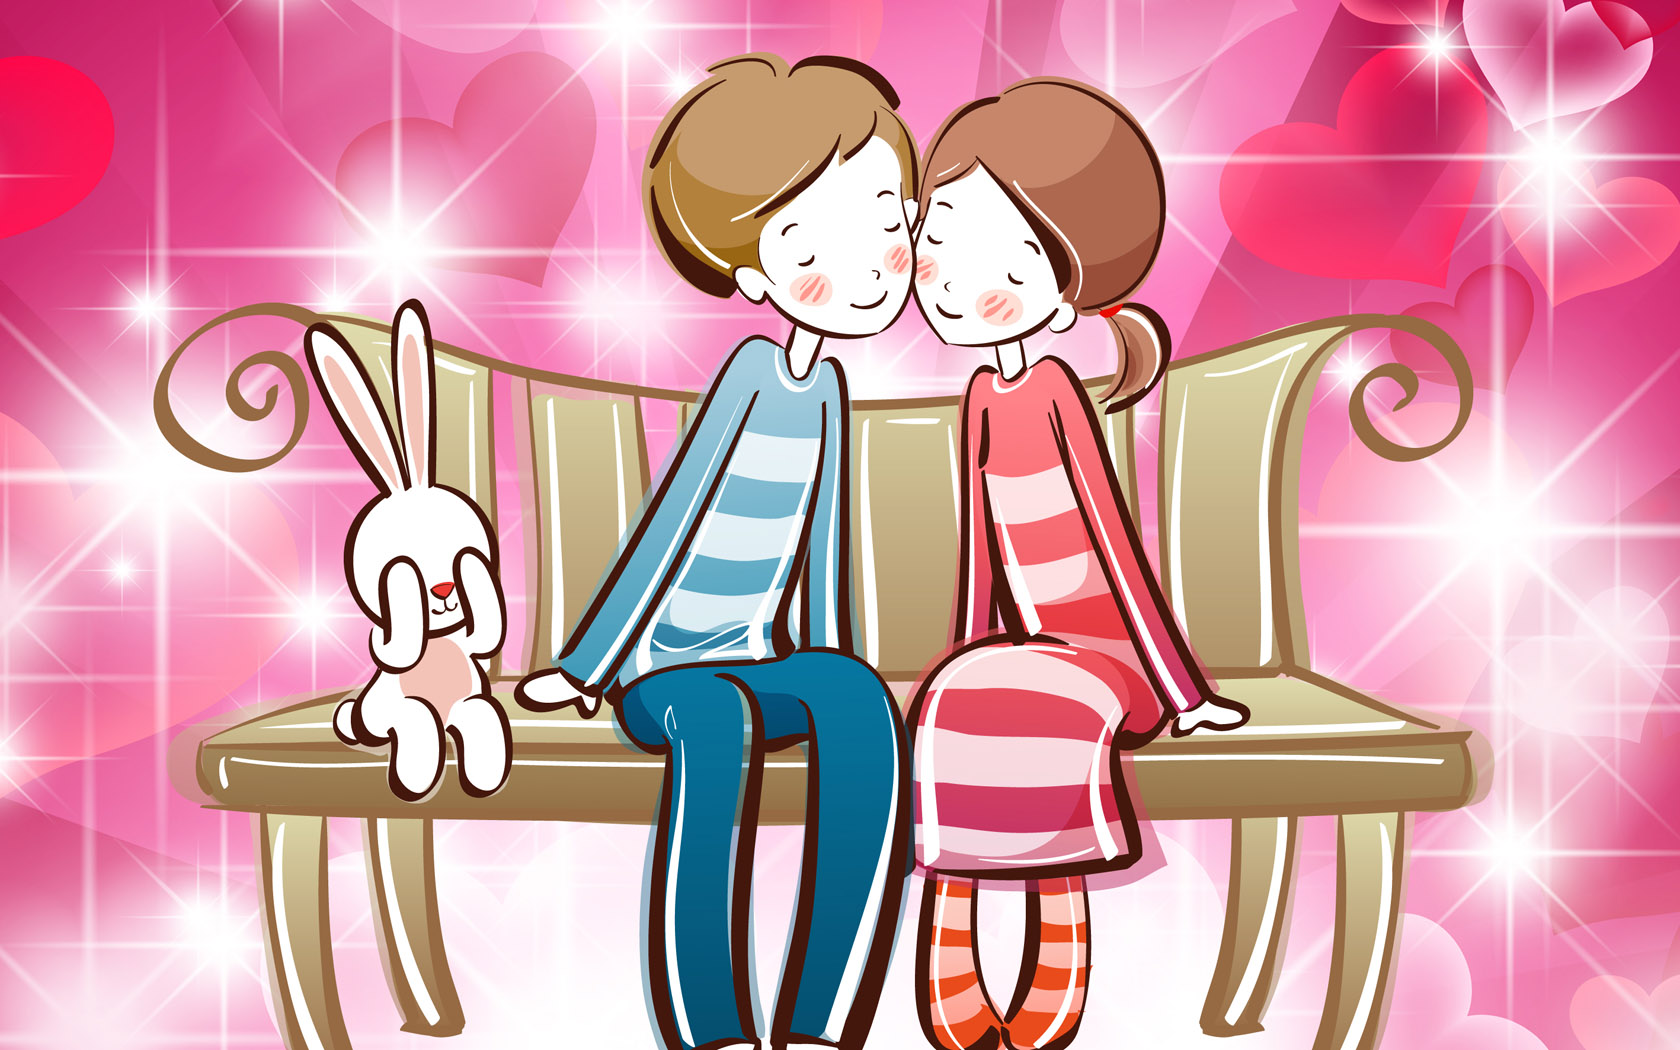 Cute Couple Desktop Wallpaper in the Year of the Rabbit